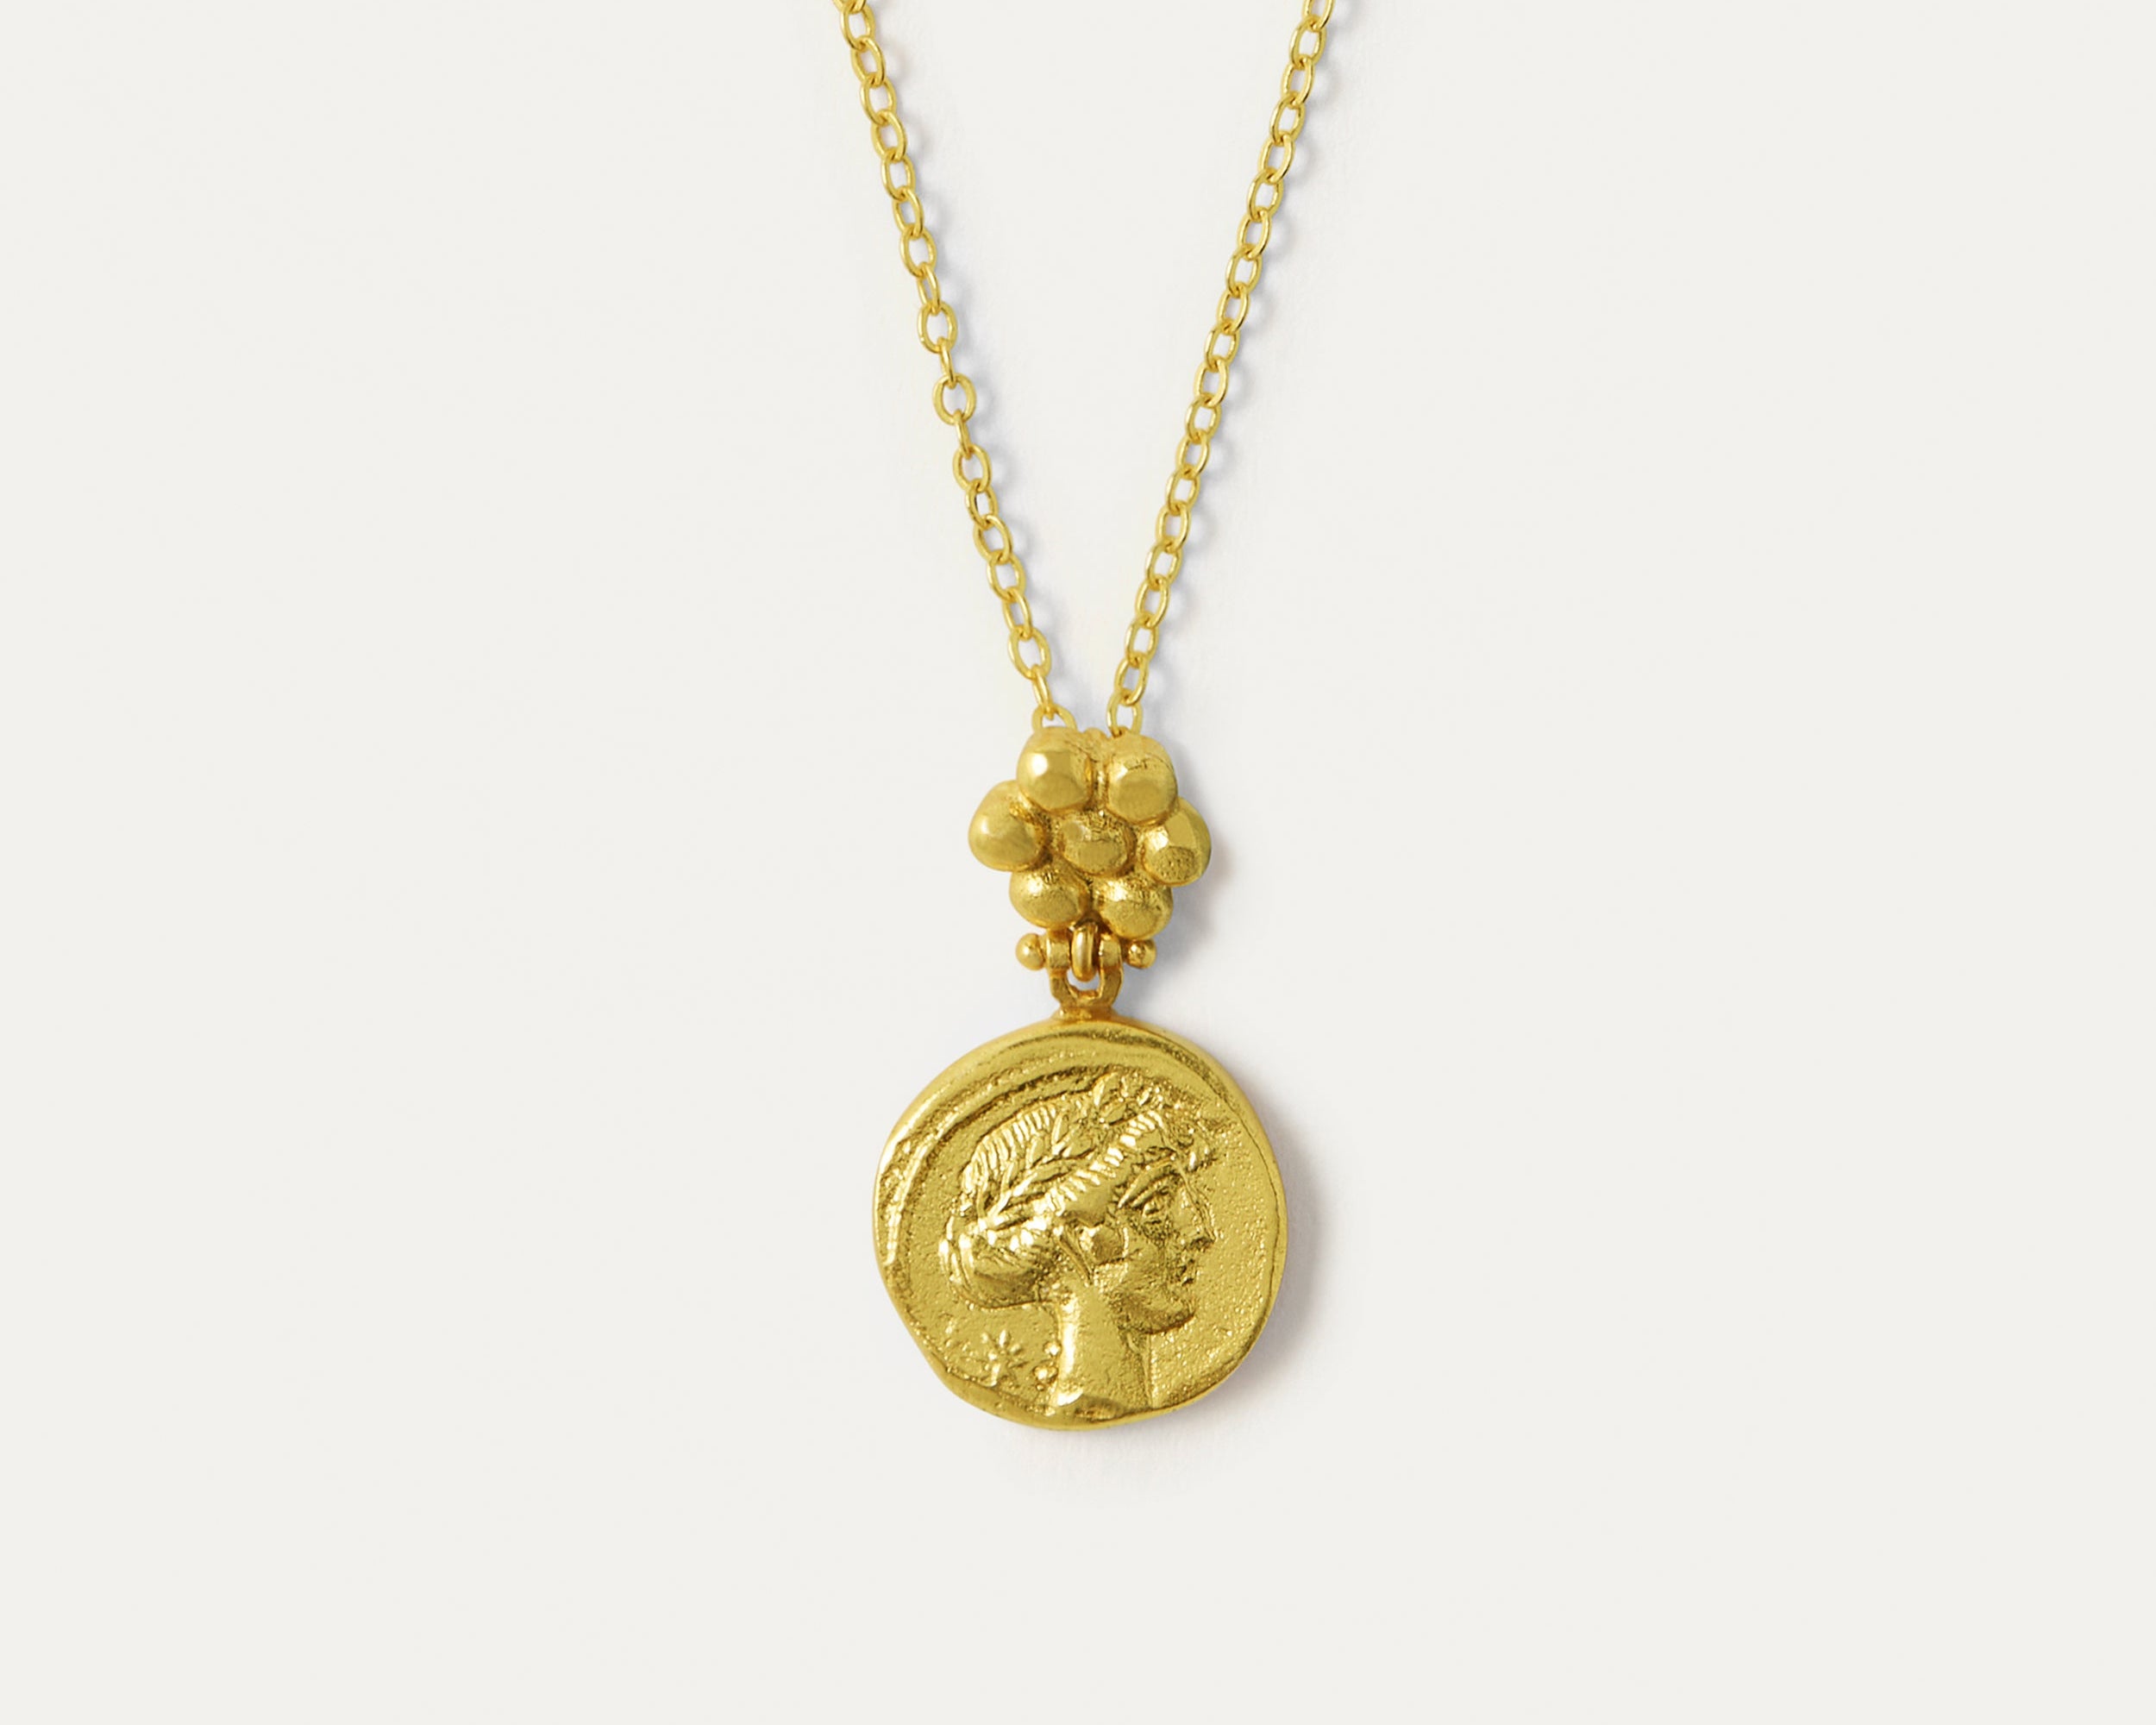 Goddess Demeter Coin Pendant Necklace | Sustainable Jewellery by Ottoman Hands